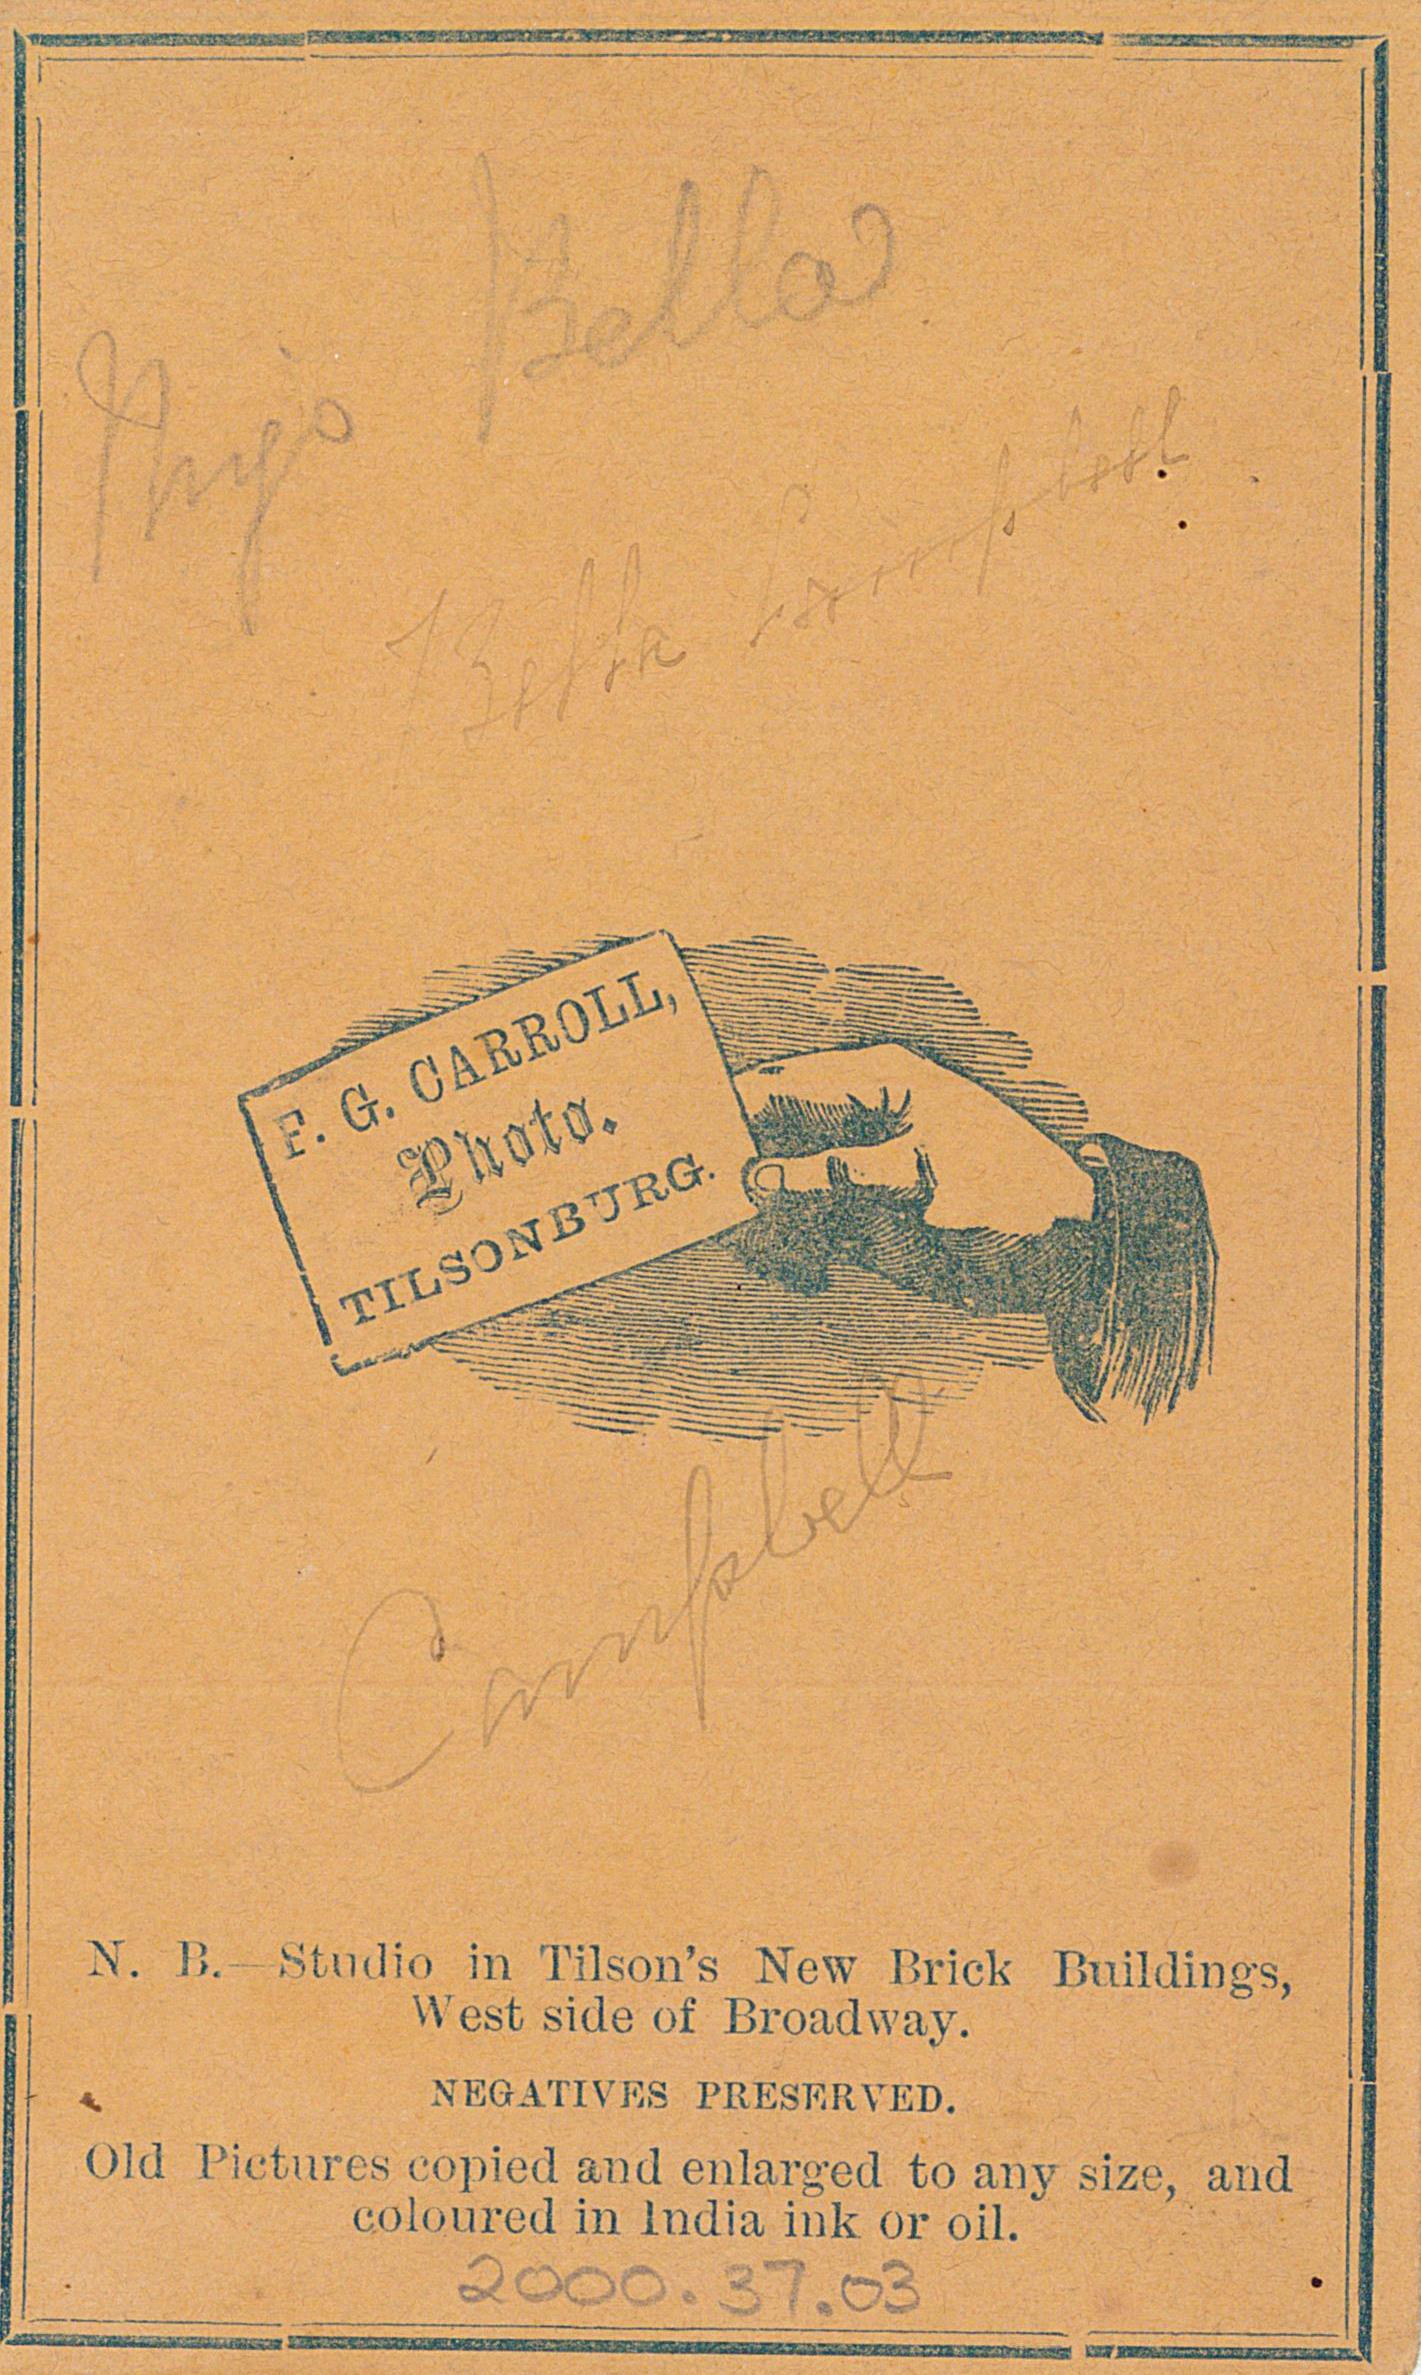 Back of orange cabinet card from F.G. Carroll's photography studio. Feature a sketch of a hand holding a card. 